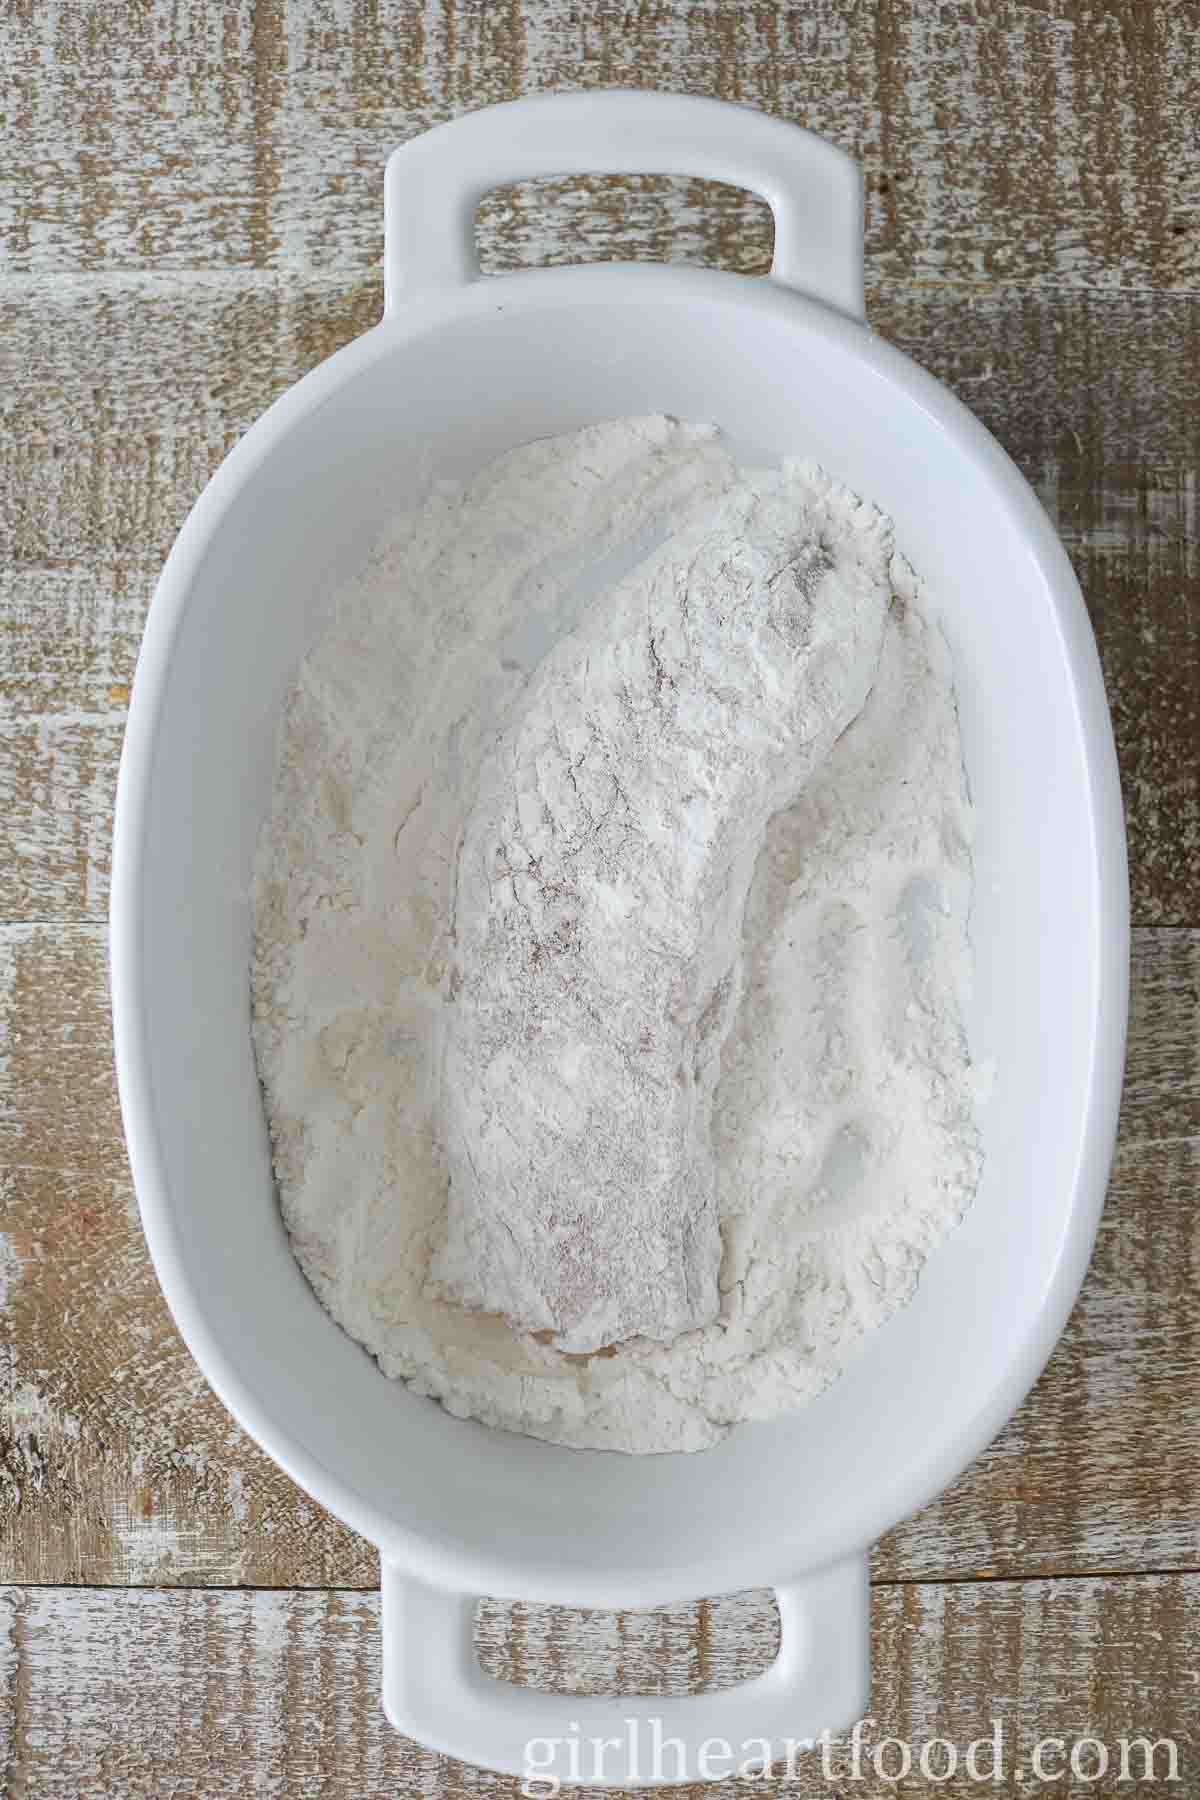 Flour-coated cod fillet in a white dish.